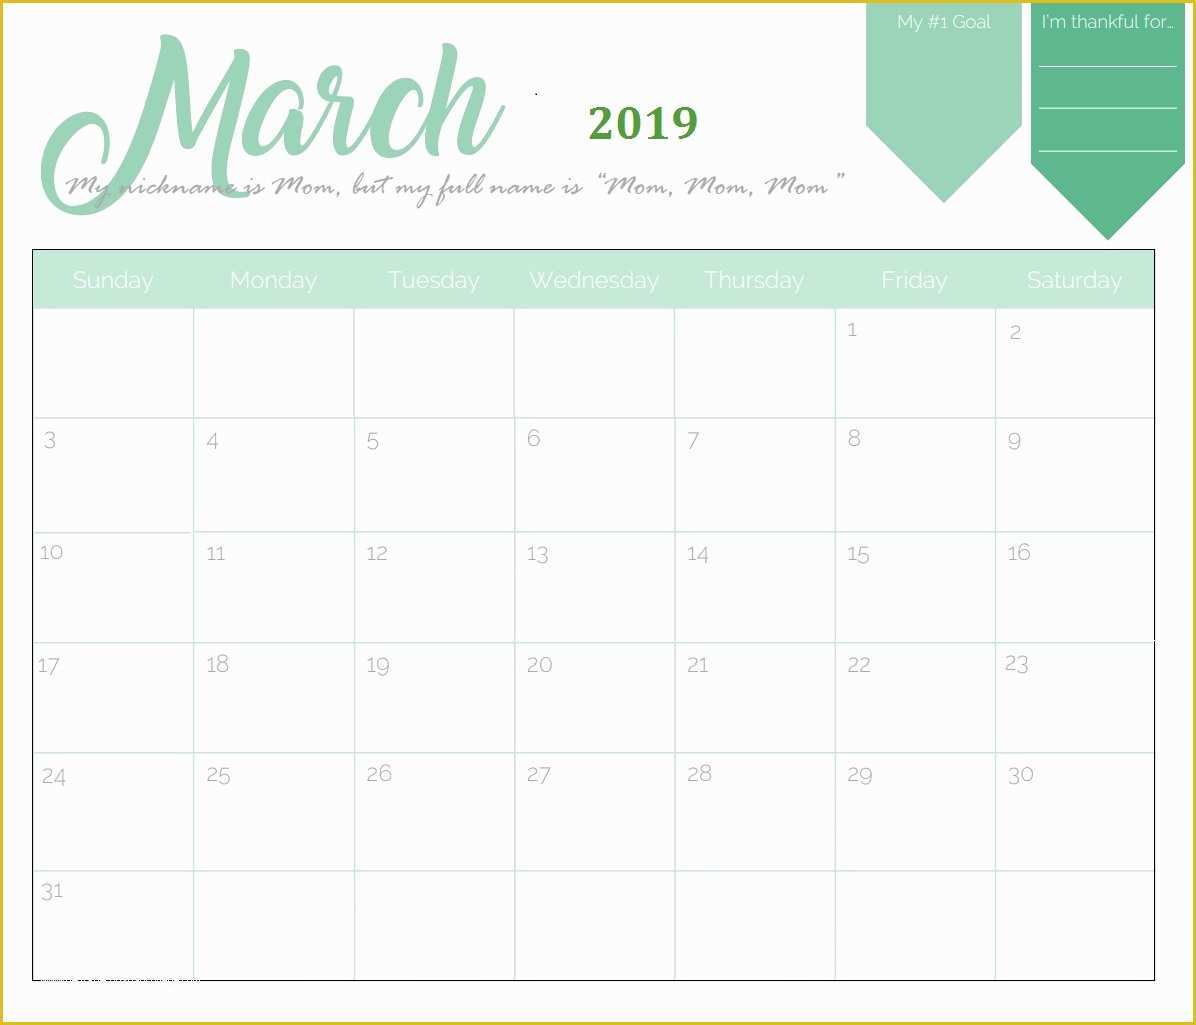 Holiday Schedule Template Free Of Monthly 2019 Holidays Calendar Templates